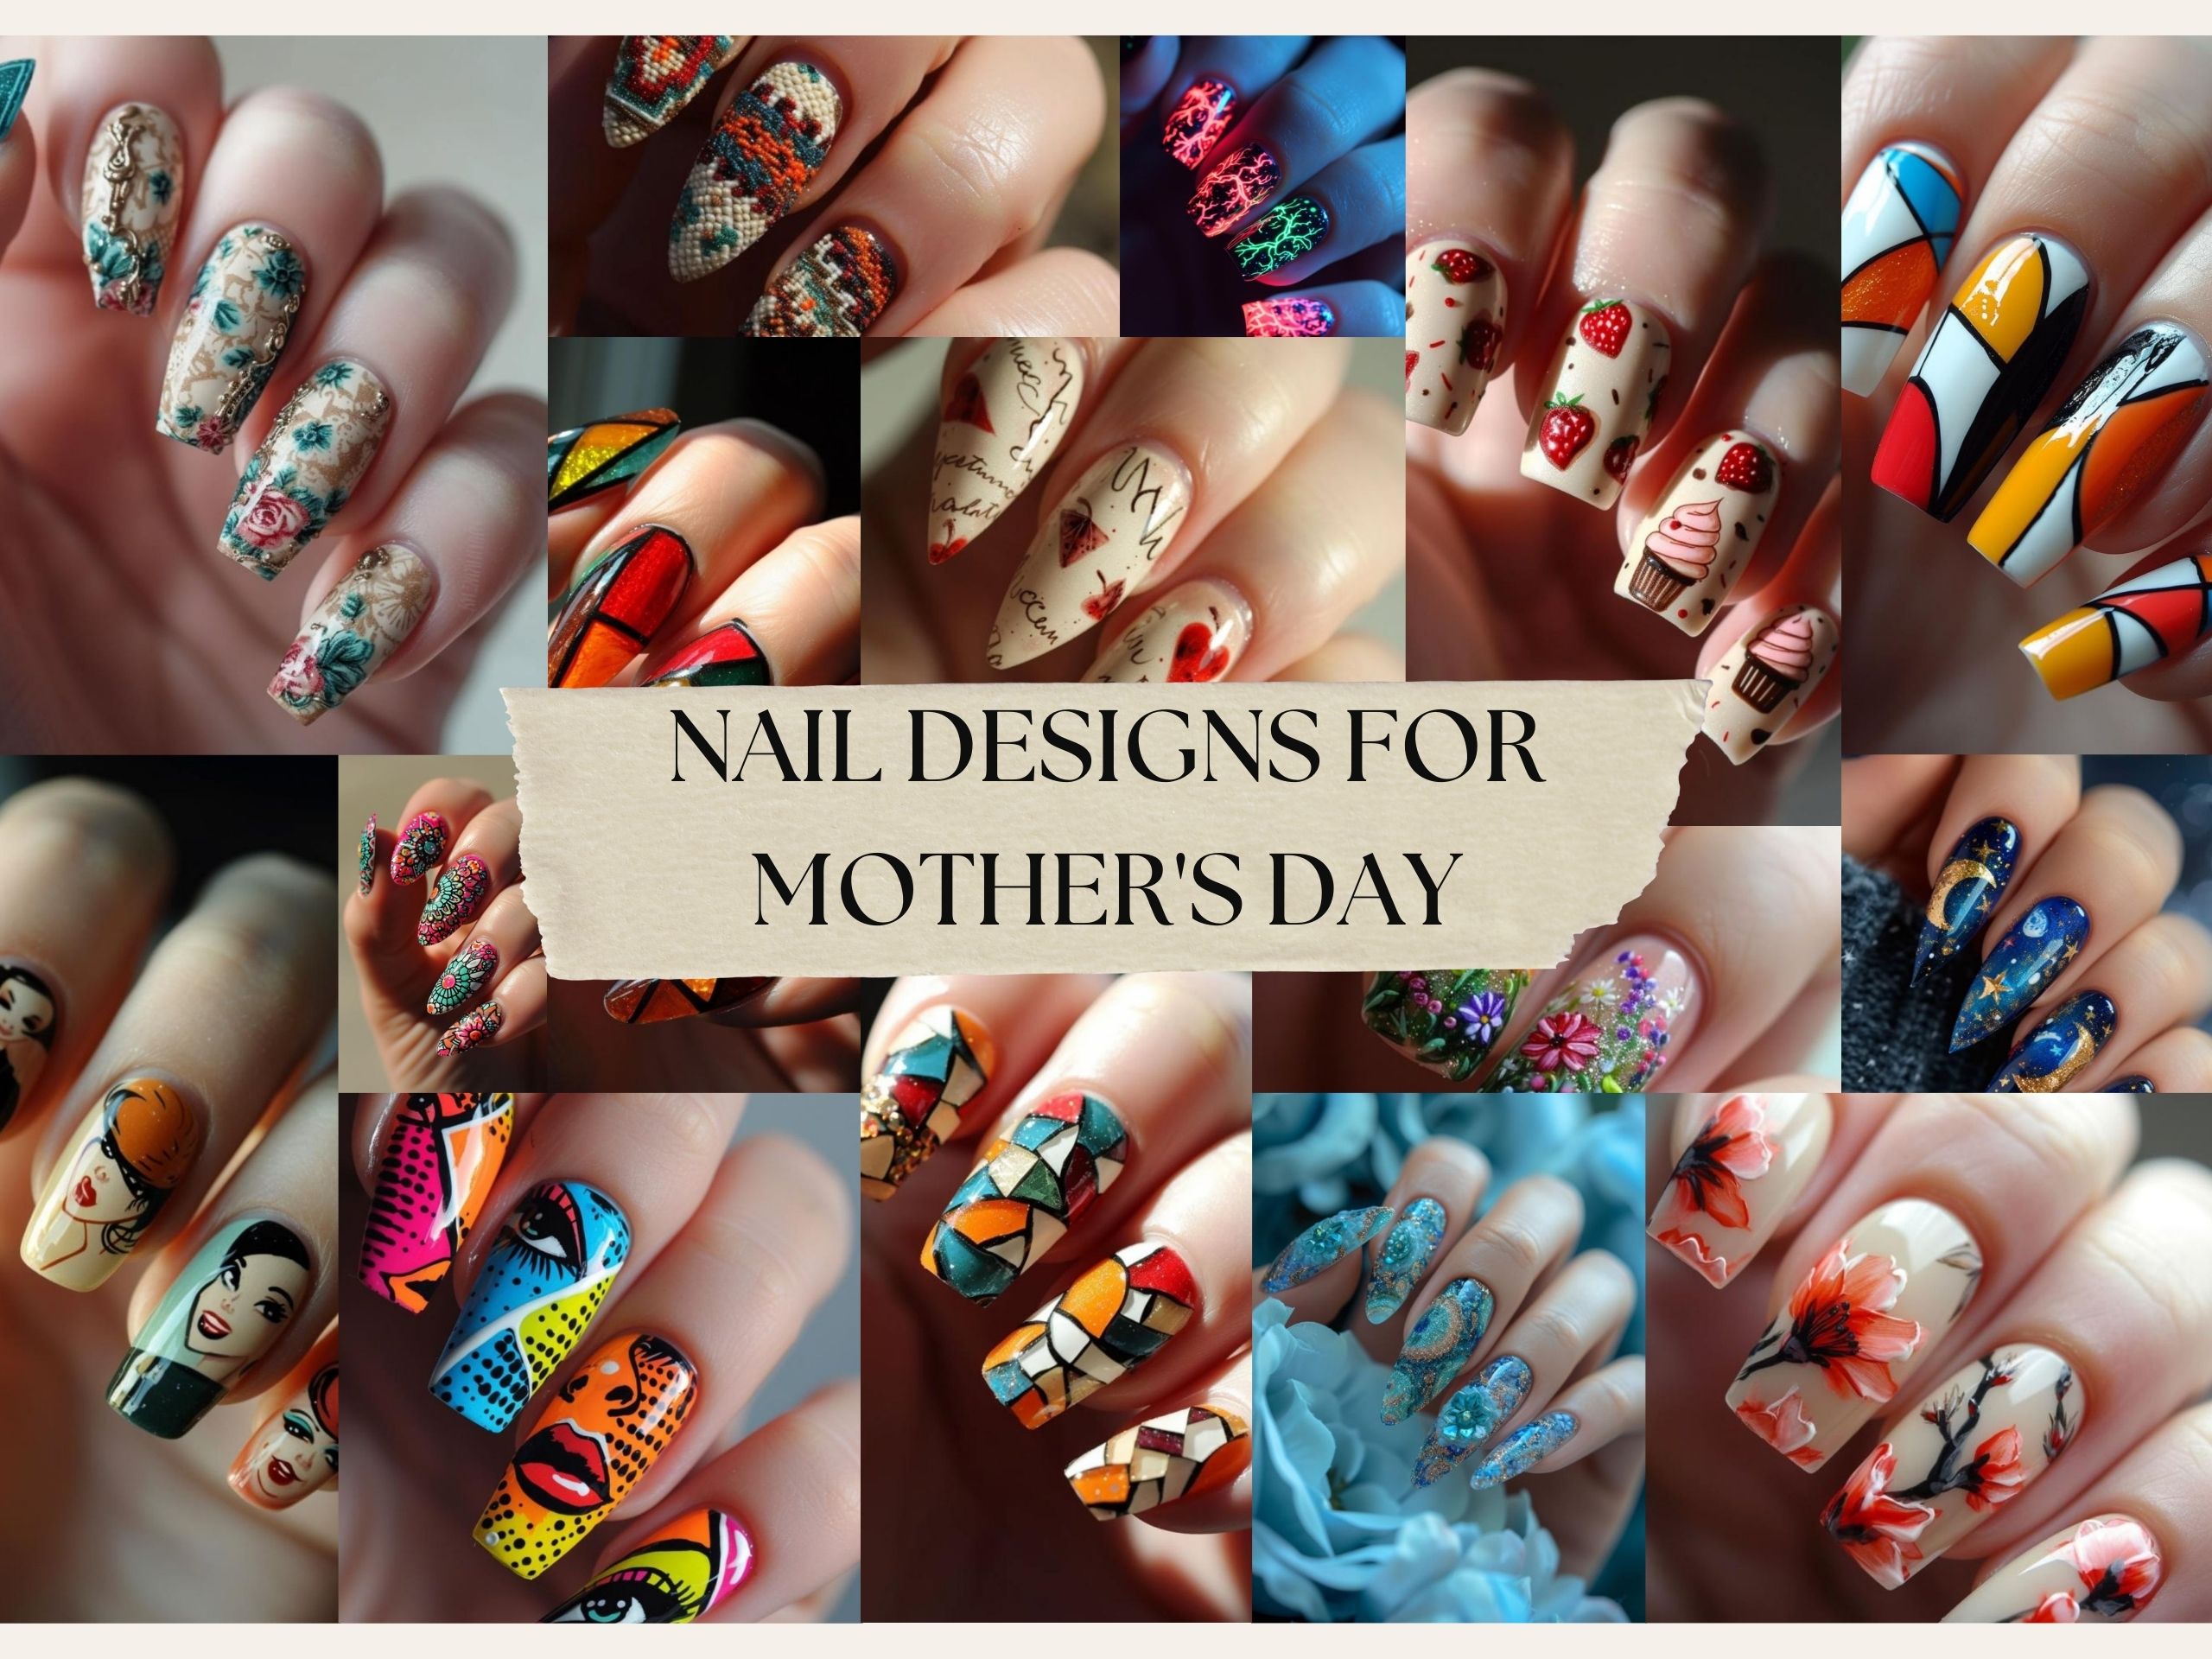 Nail Designs for Mother's Day